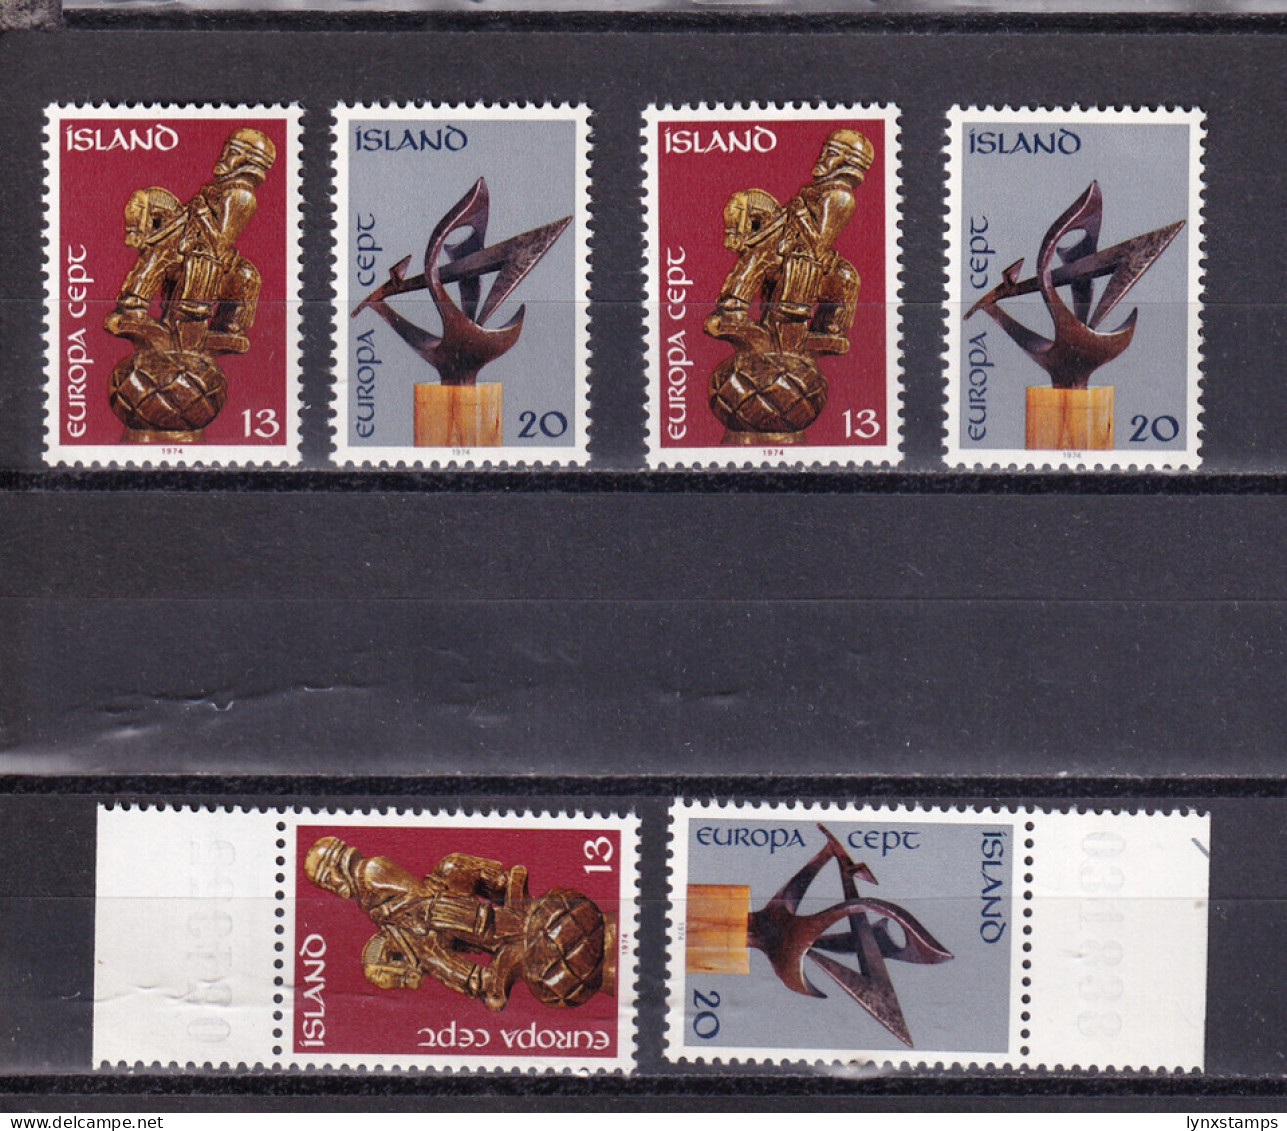 LI03 Iceland Europa (C.E.P.T.) 1974 - Sculptures Mint Stamps Selection - Unused Stamps